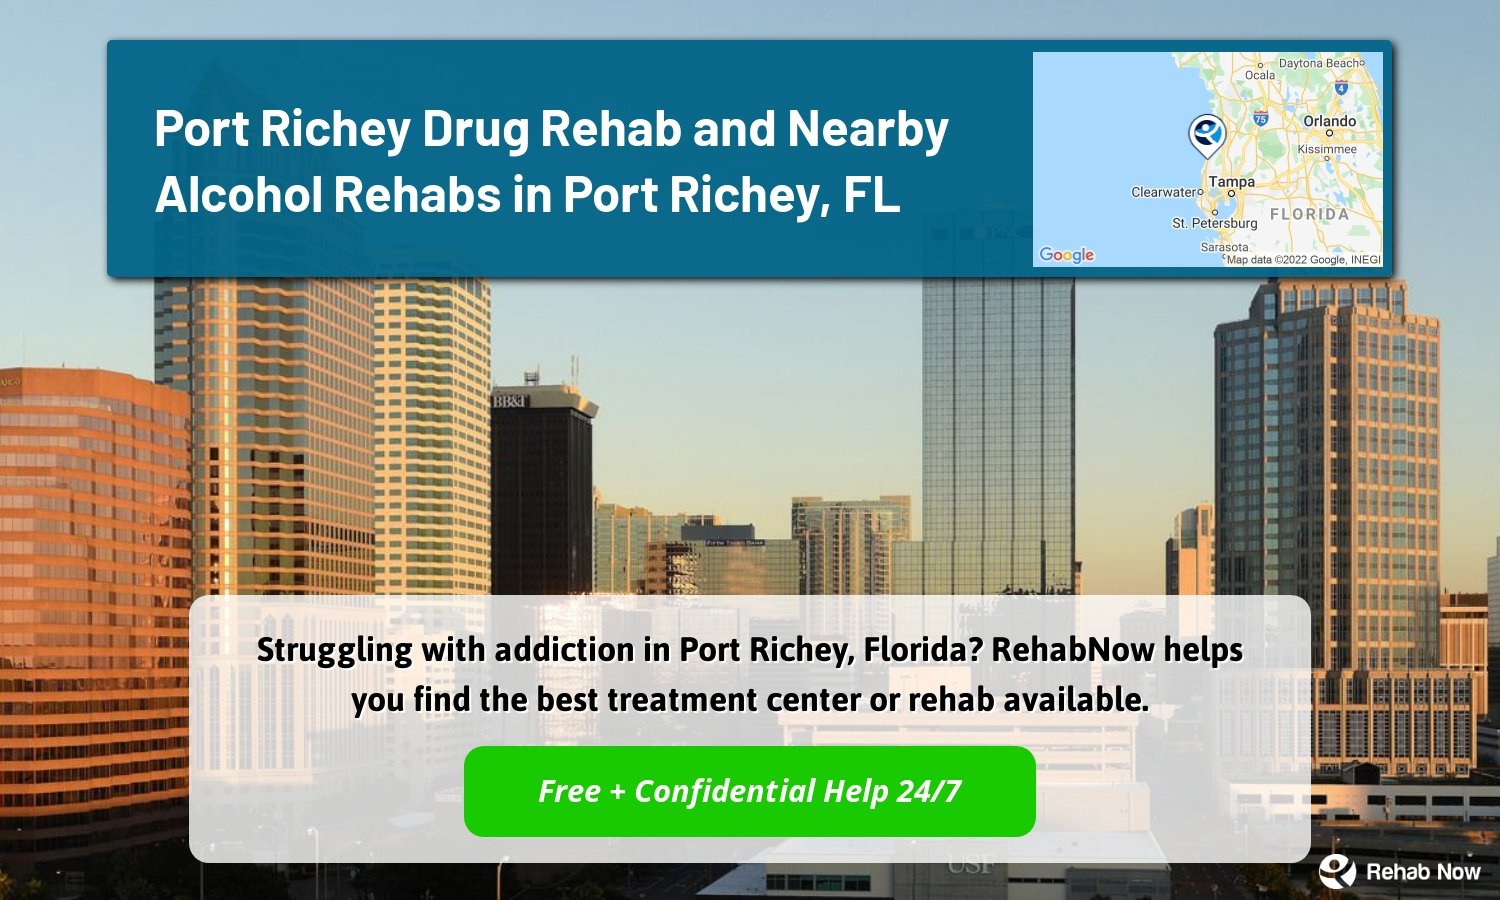 Struggling with addiction in Port Richey, Florida? RehabNow helps you find the best treatment center or rehab available.